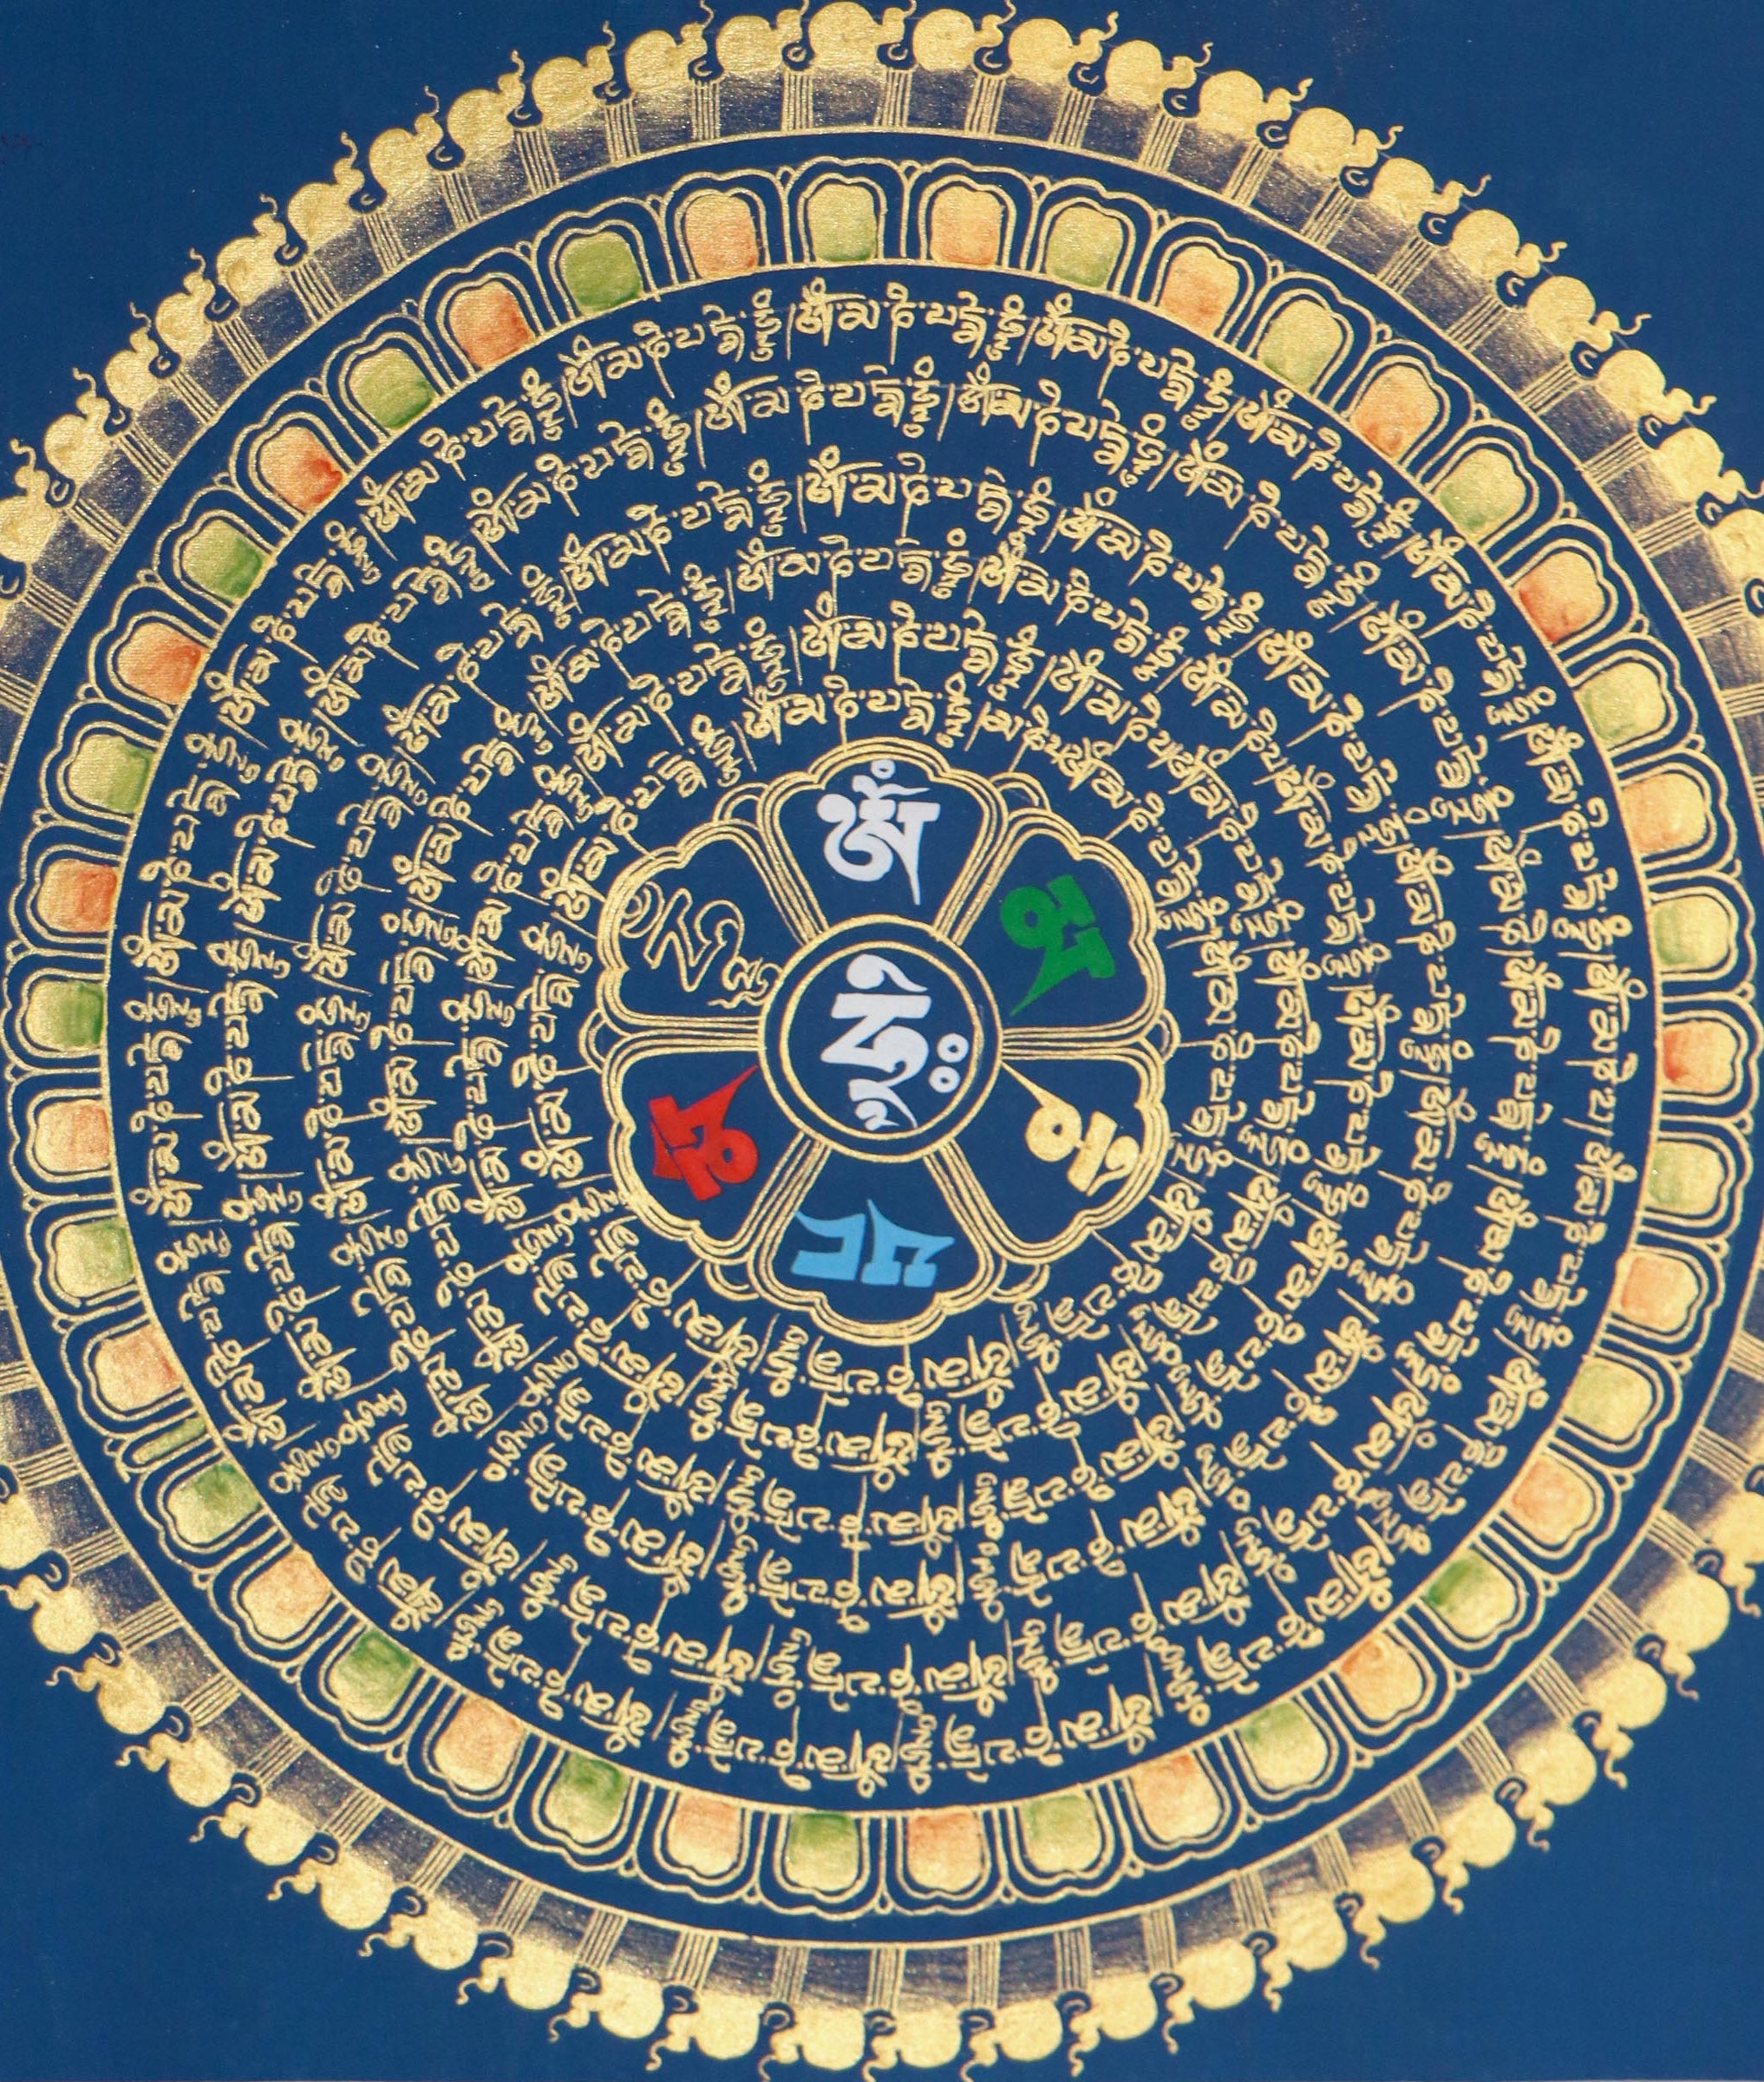 Blue Mantra Mandala Thangka with Om Mani Padme hum scripted in the centre.